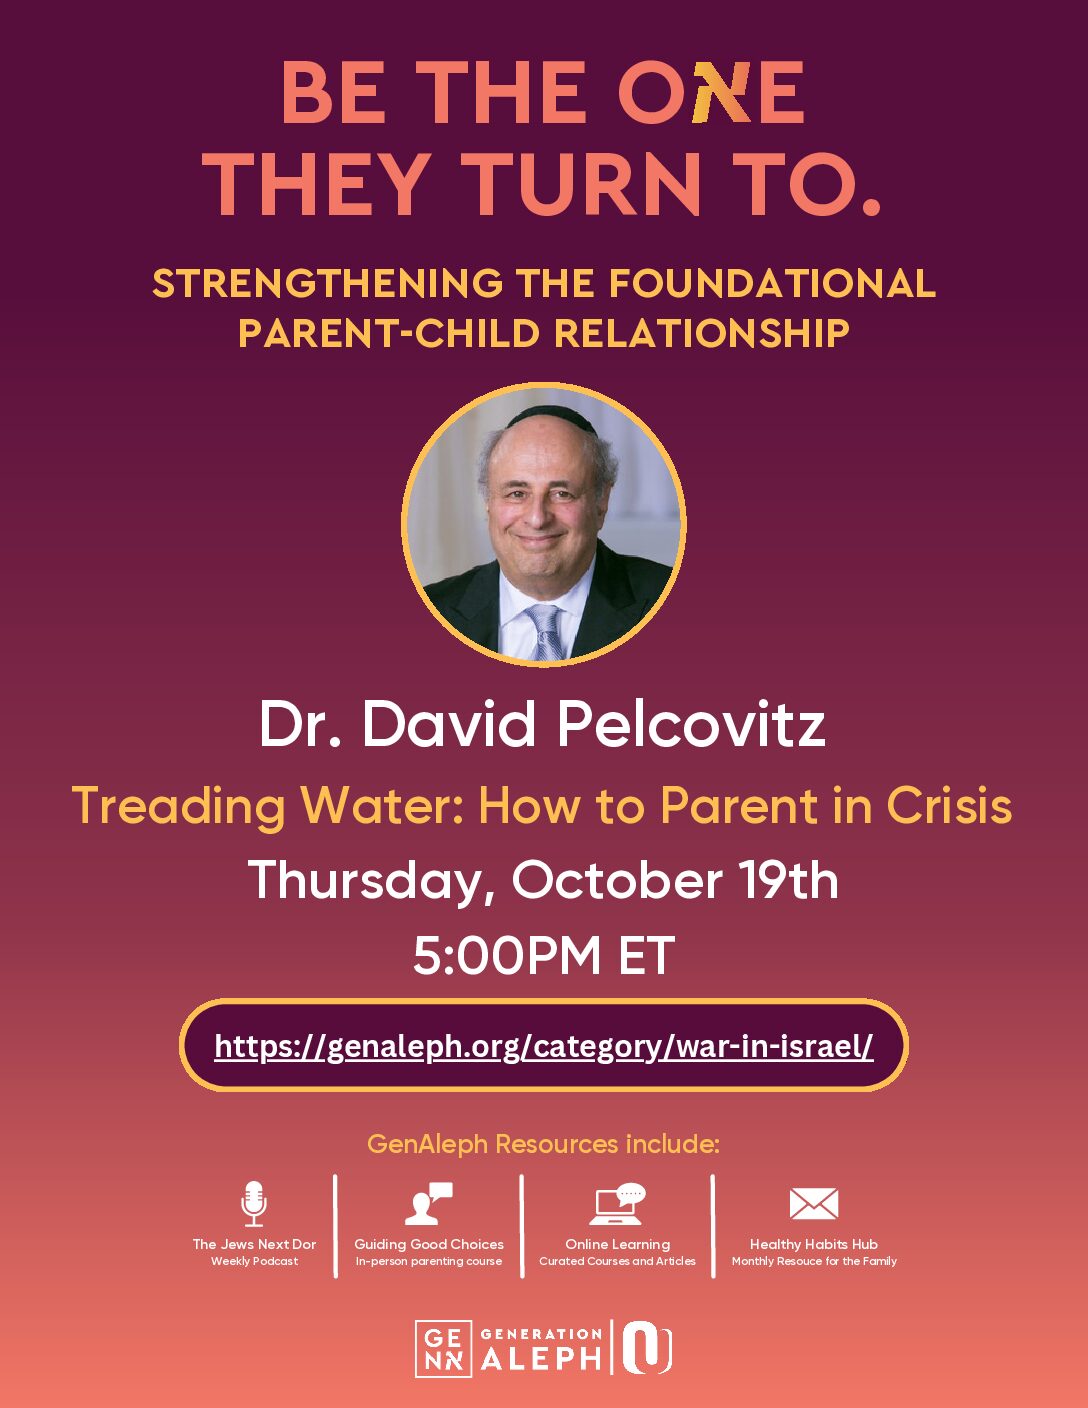 Treading Water: How to Parent in Crisis – Dr. David Pelcovitz